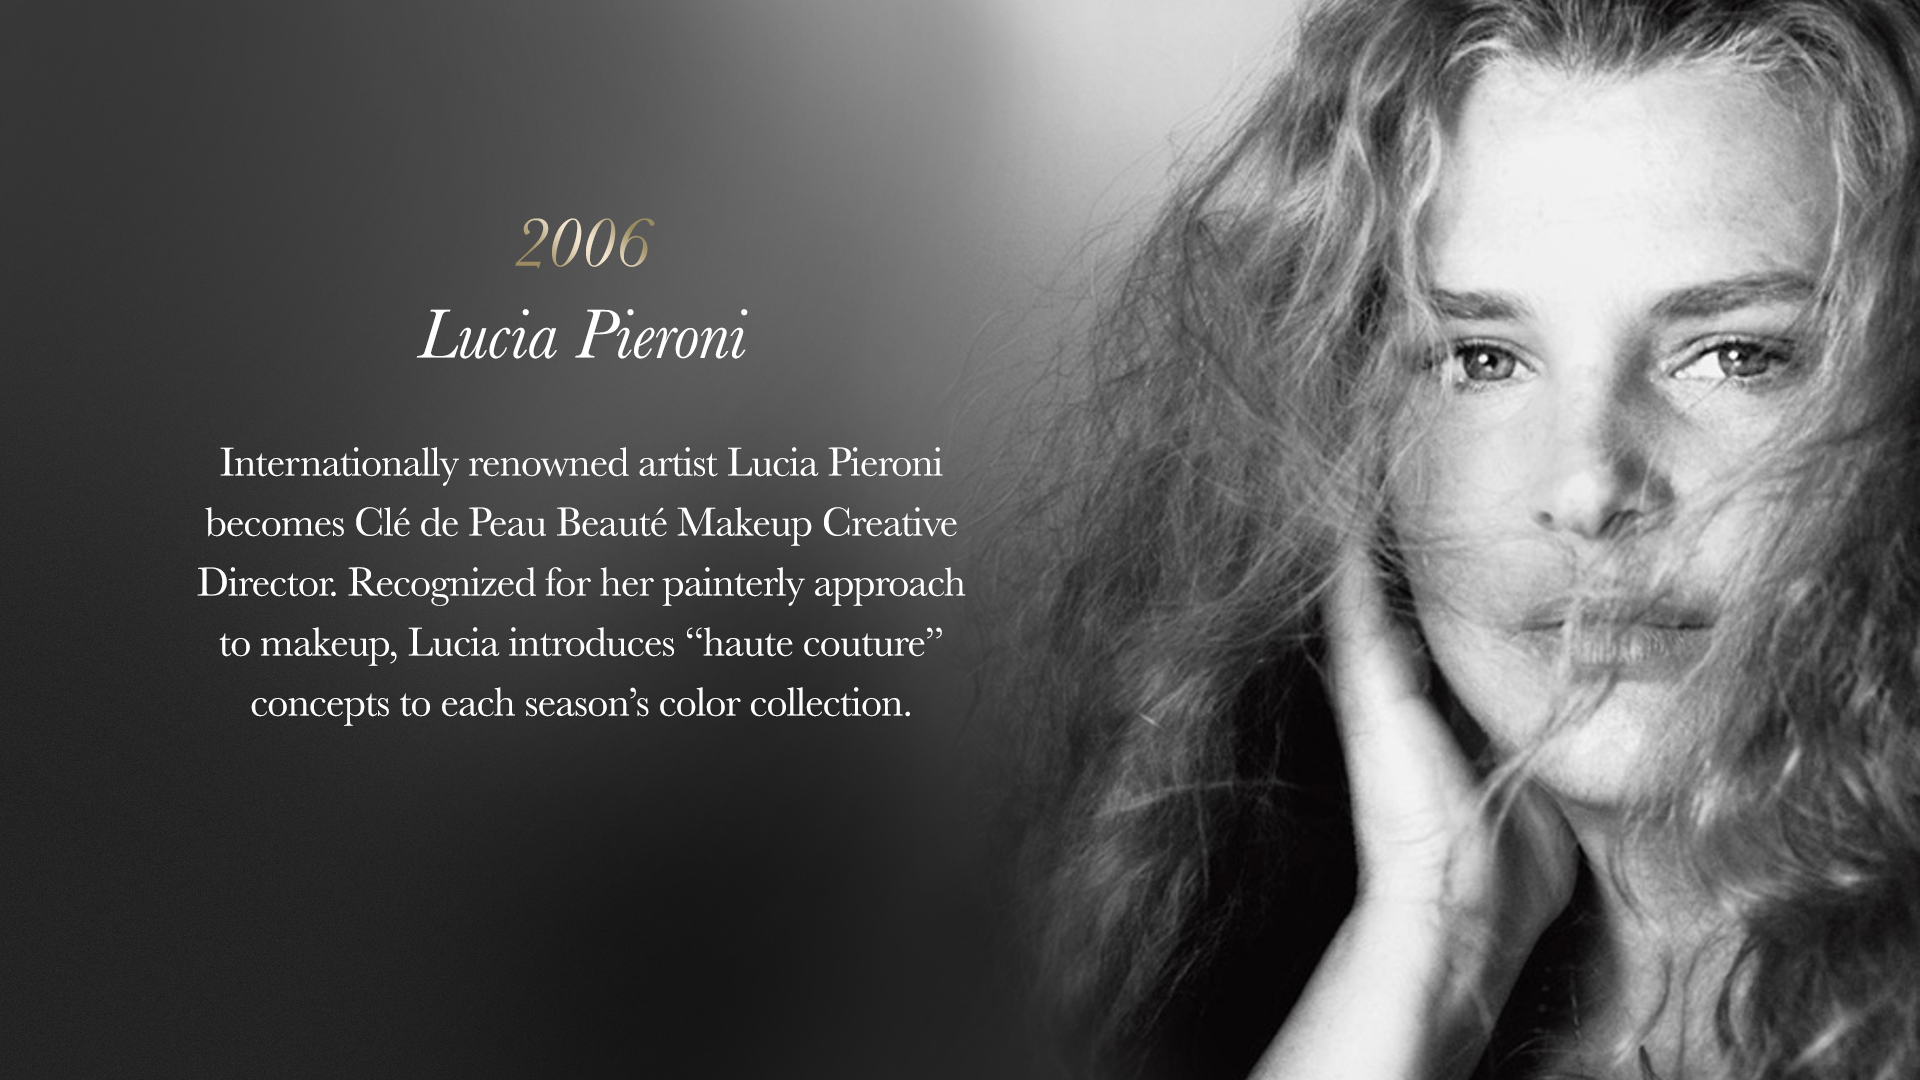 Internationally renowned artist Lucia Pieroni becomes Clé de Peau Beauté Makeup Creative Director. Recognized for her painterly approach to makeup, Lucia introduces &ldquo;haute couture&rdquo; concepts to each season’s color collection. 